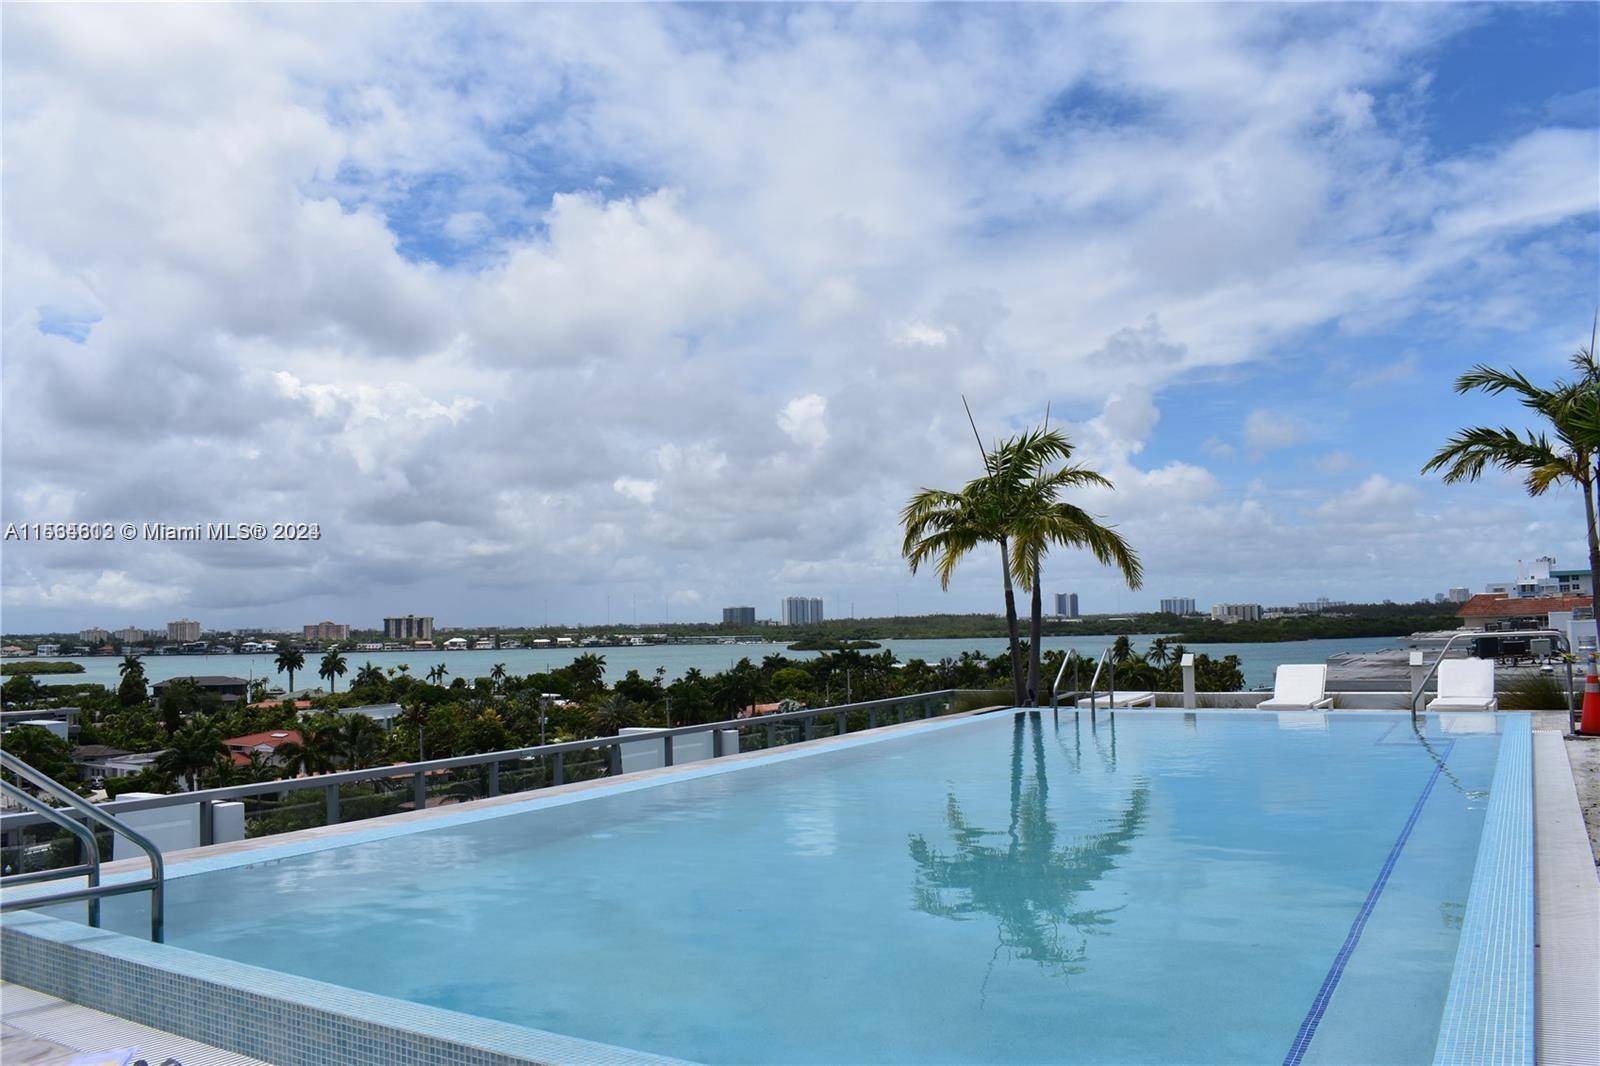 Experience luxury island living in this beautiful 2bed 2bath residence nestled within Bay Harbor Islands, FL.